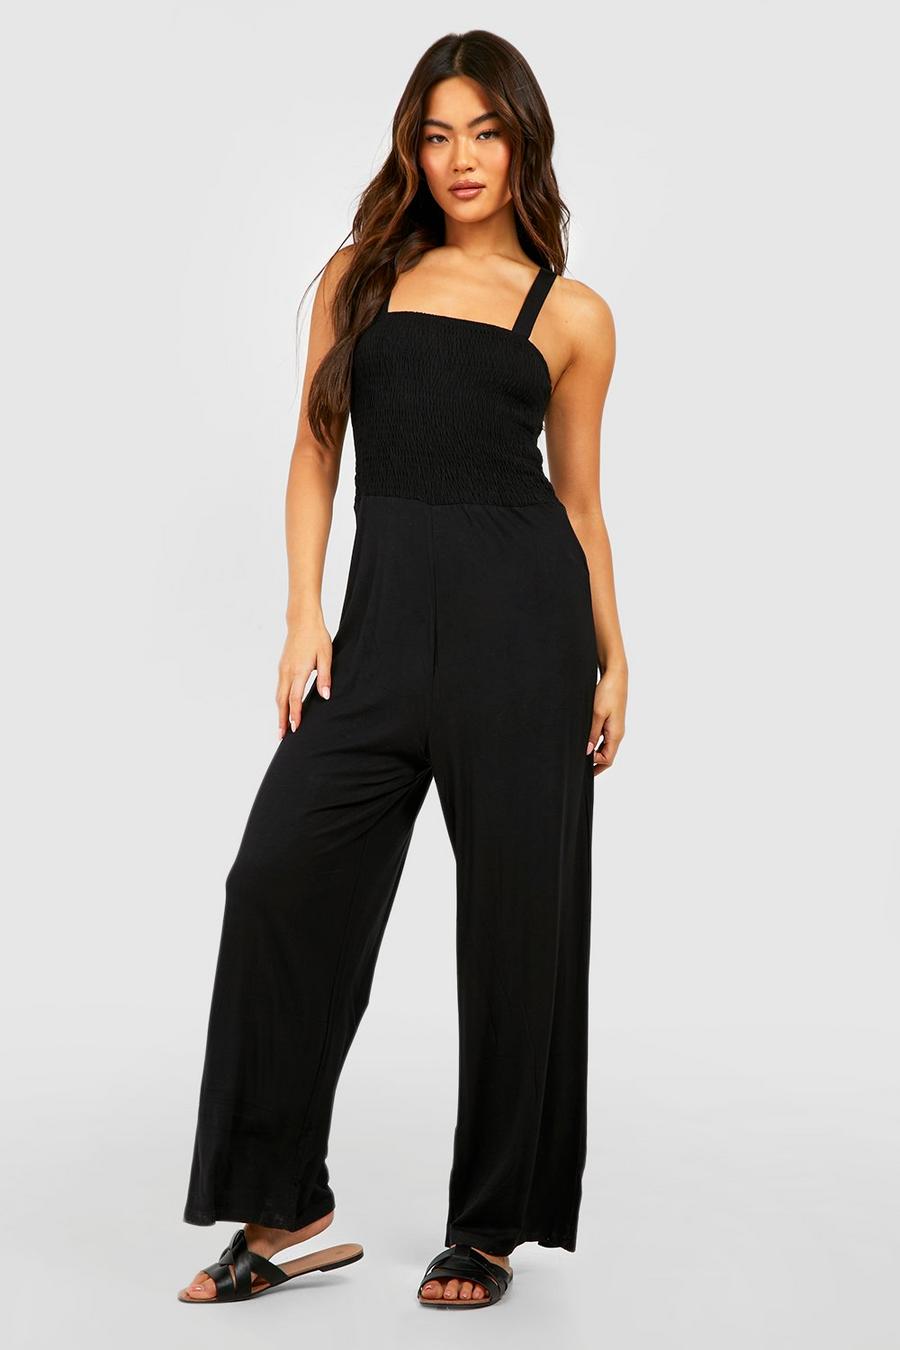 Black Strappy Shirred Top Jumpsuit